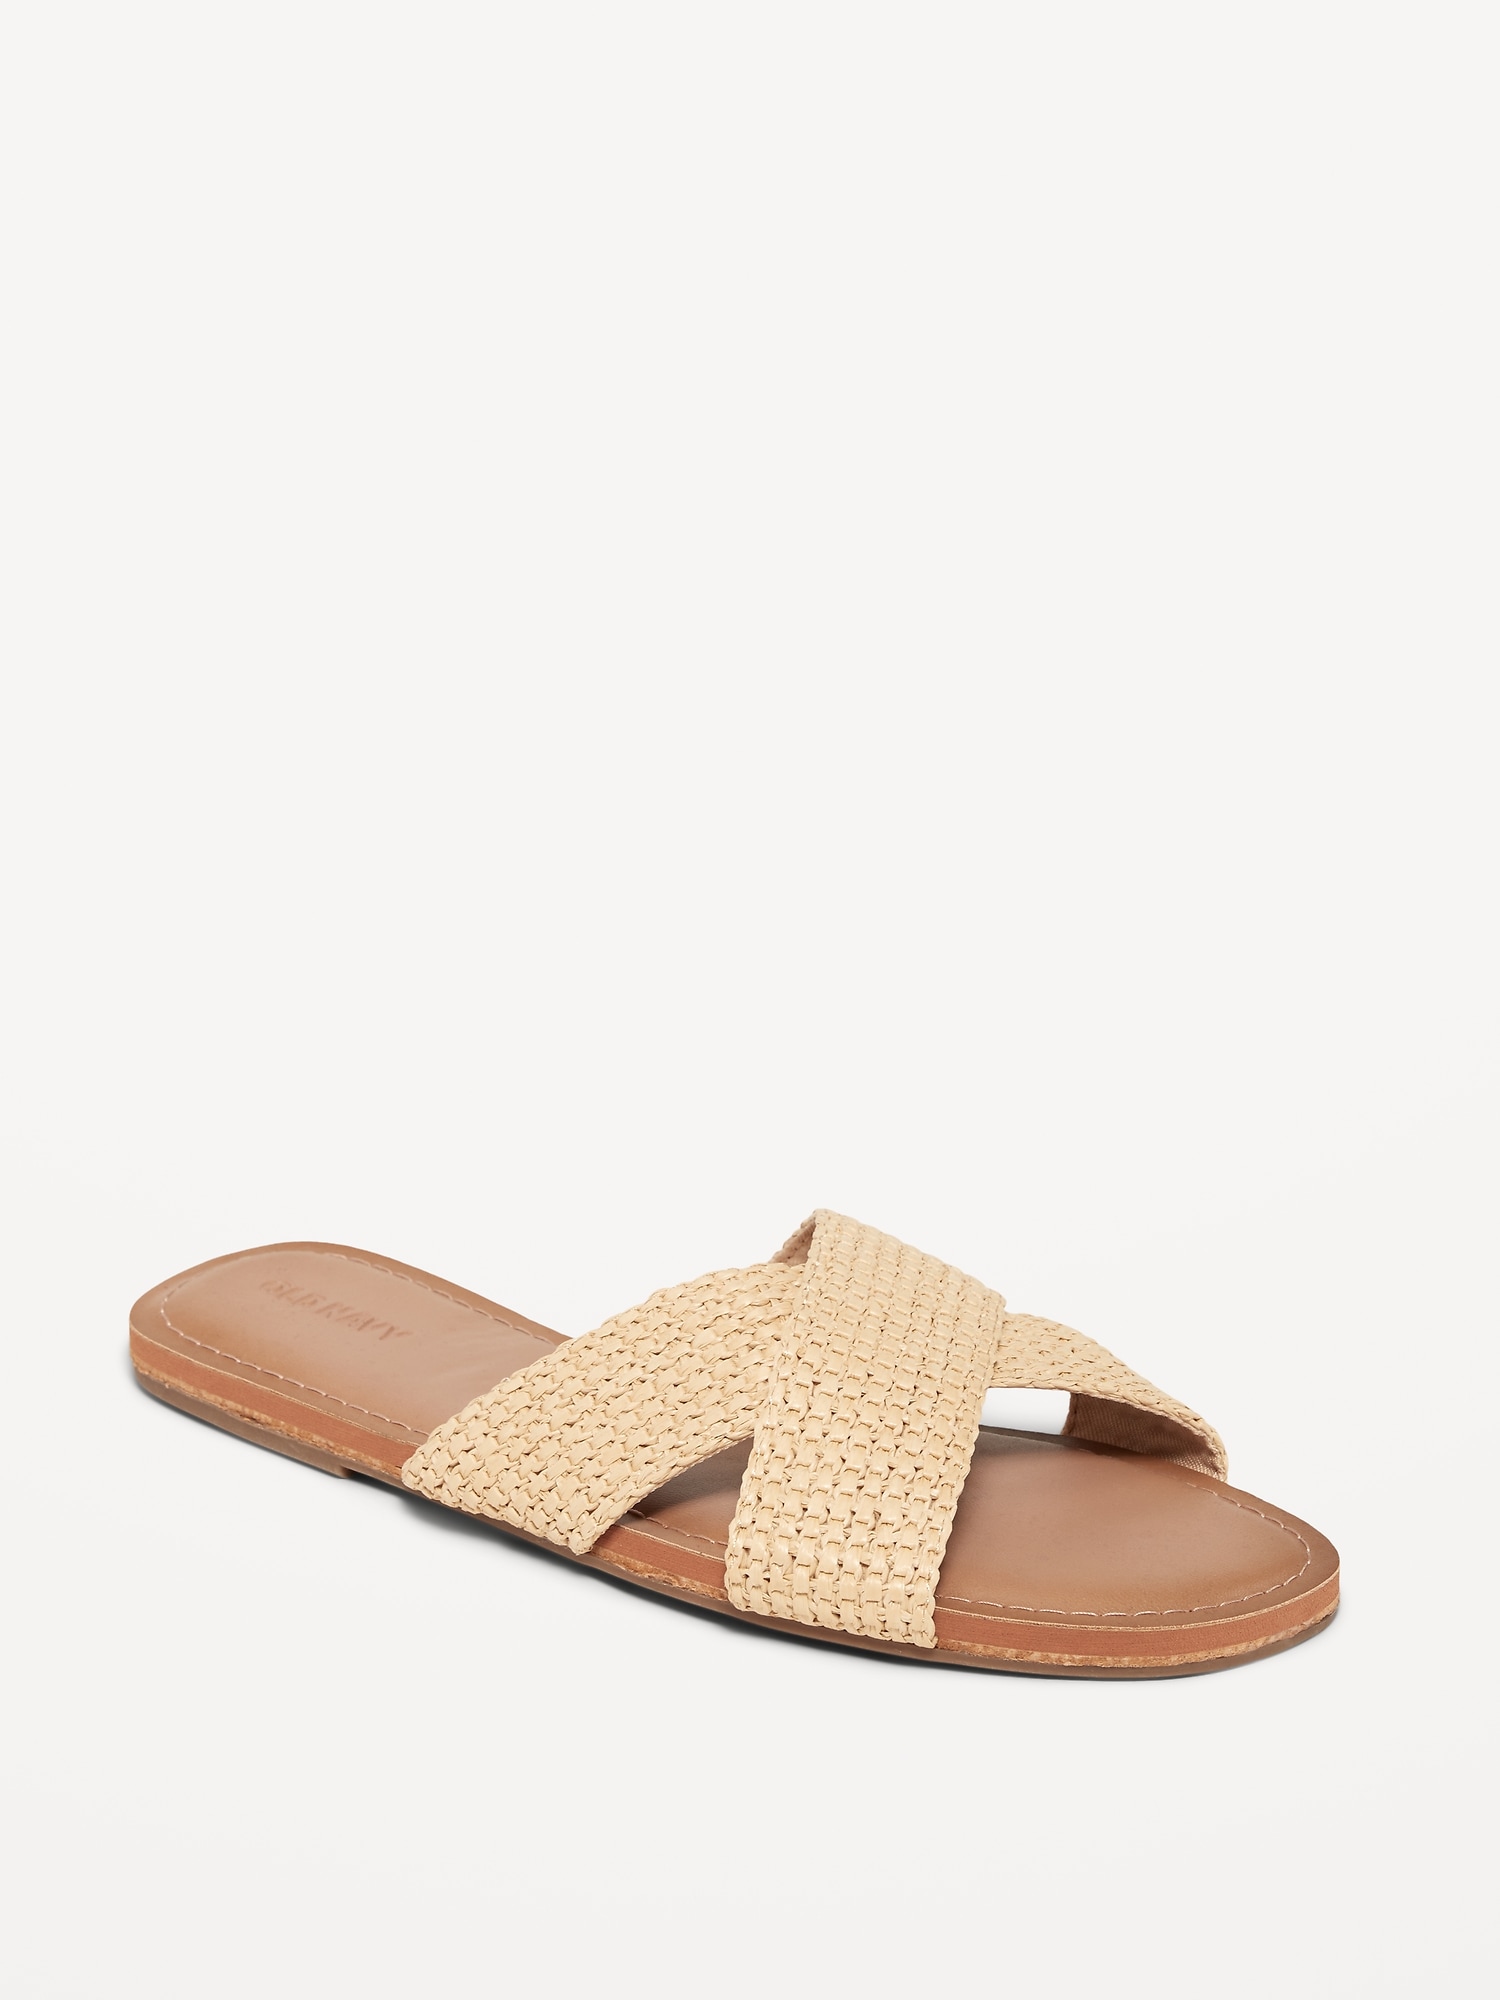 Woven Cross-Strap Sandals for Women | Old Navy